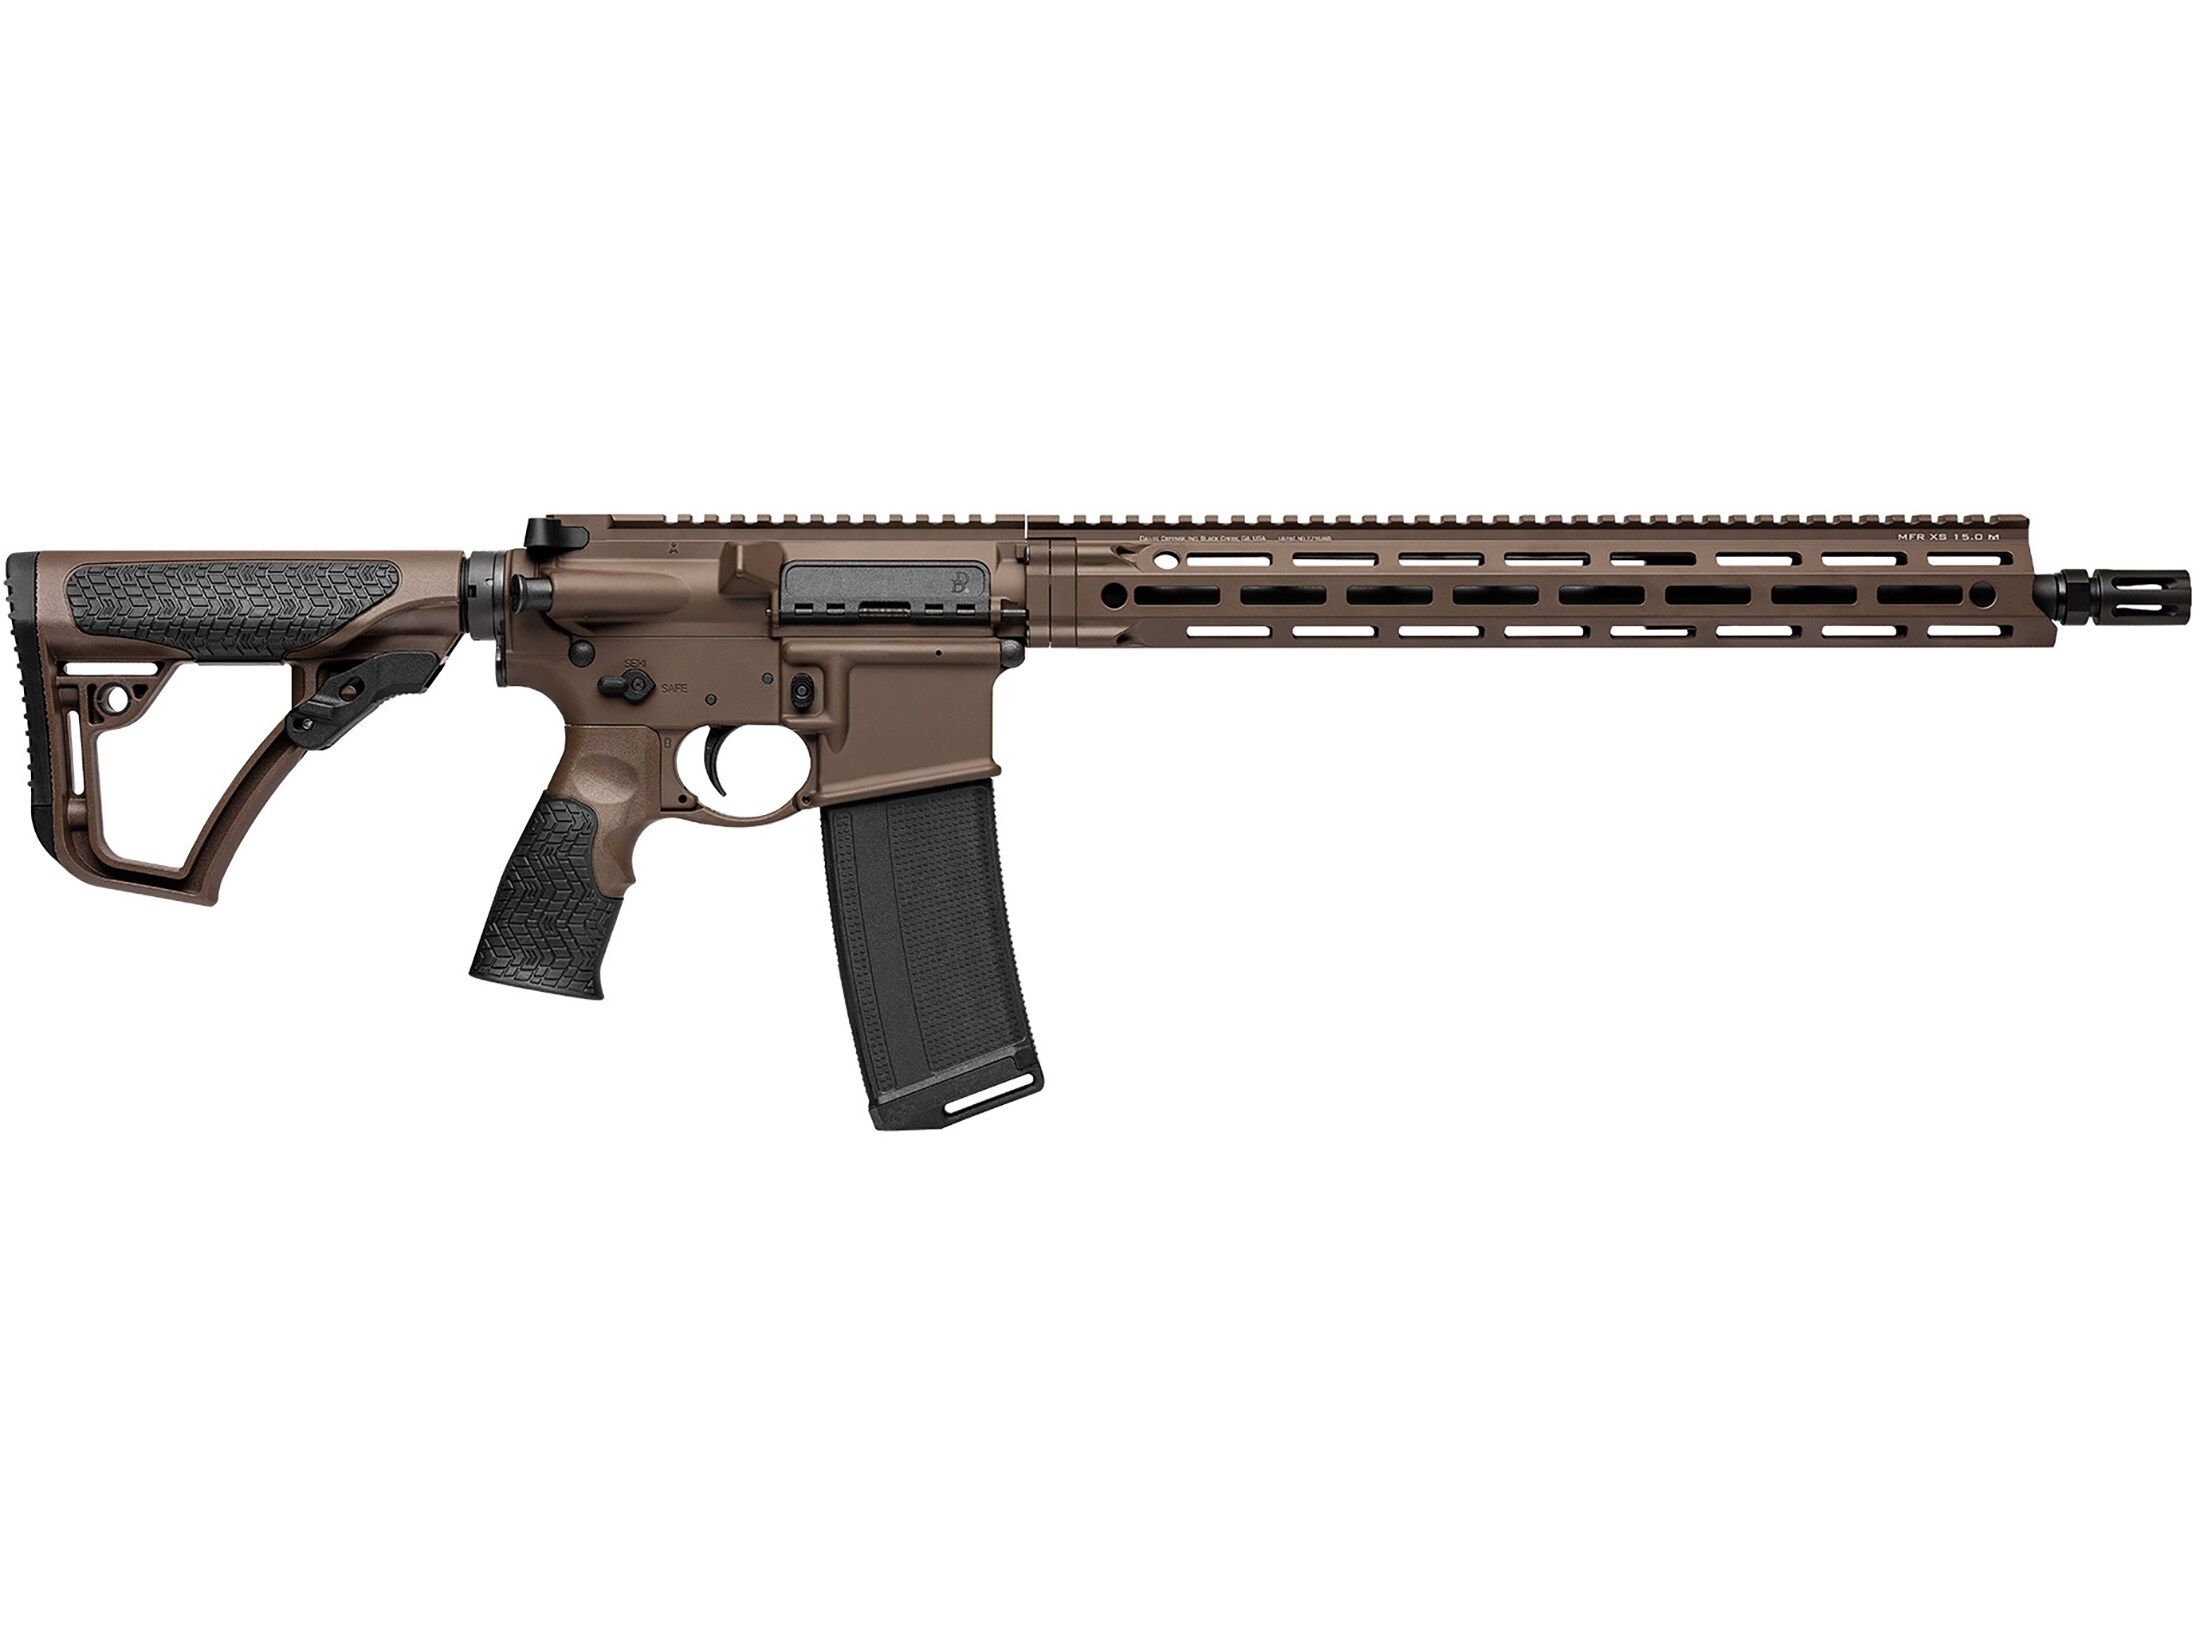 Daniel Defense DDM4v7 Semi-Automatic Centerfire Rifle For Sale | In Stock Now, Don't Miss Out! - Tactical Firearms And Archery